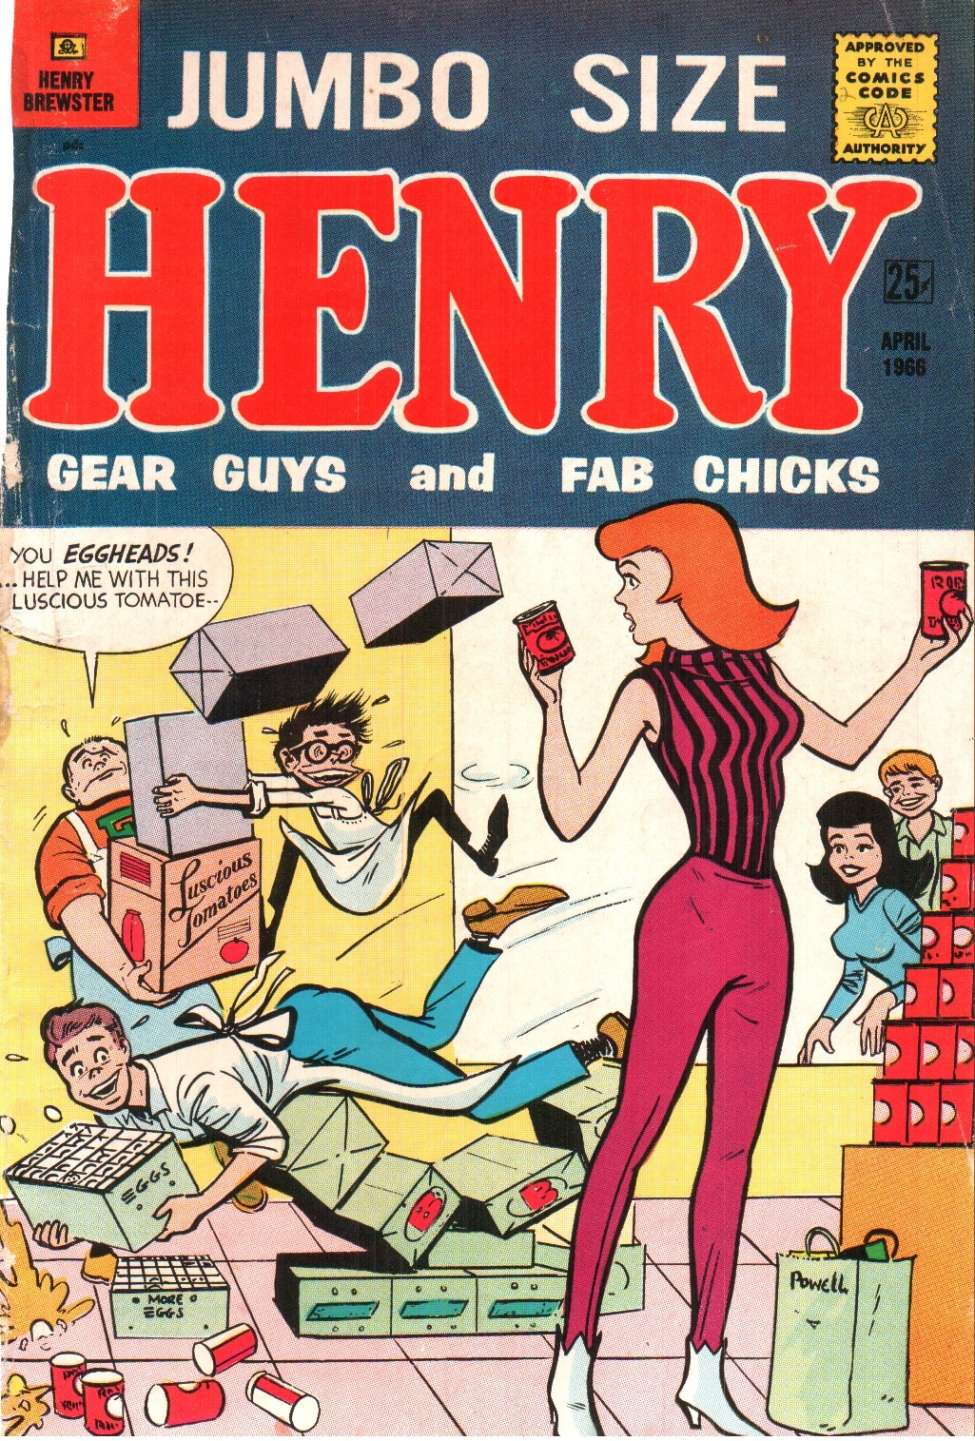 Comic Book Cover For Henry Brewster 2